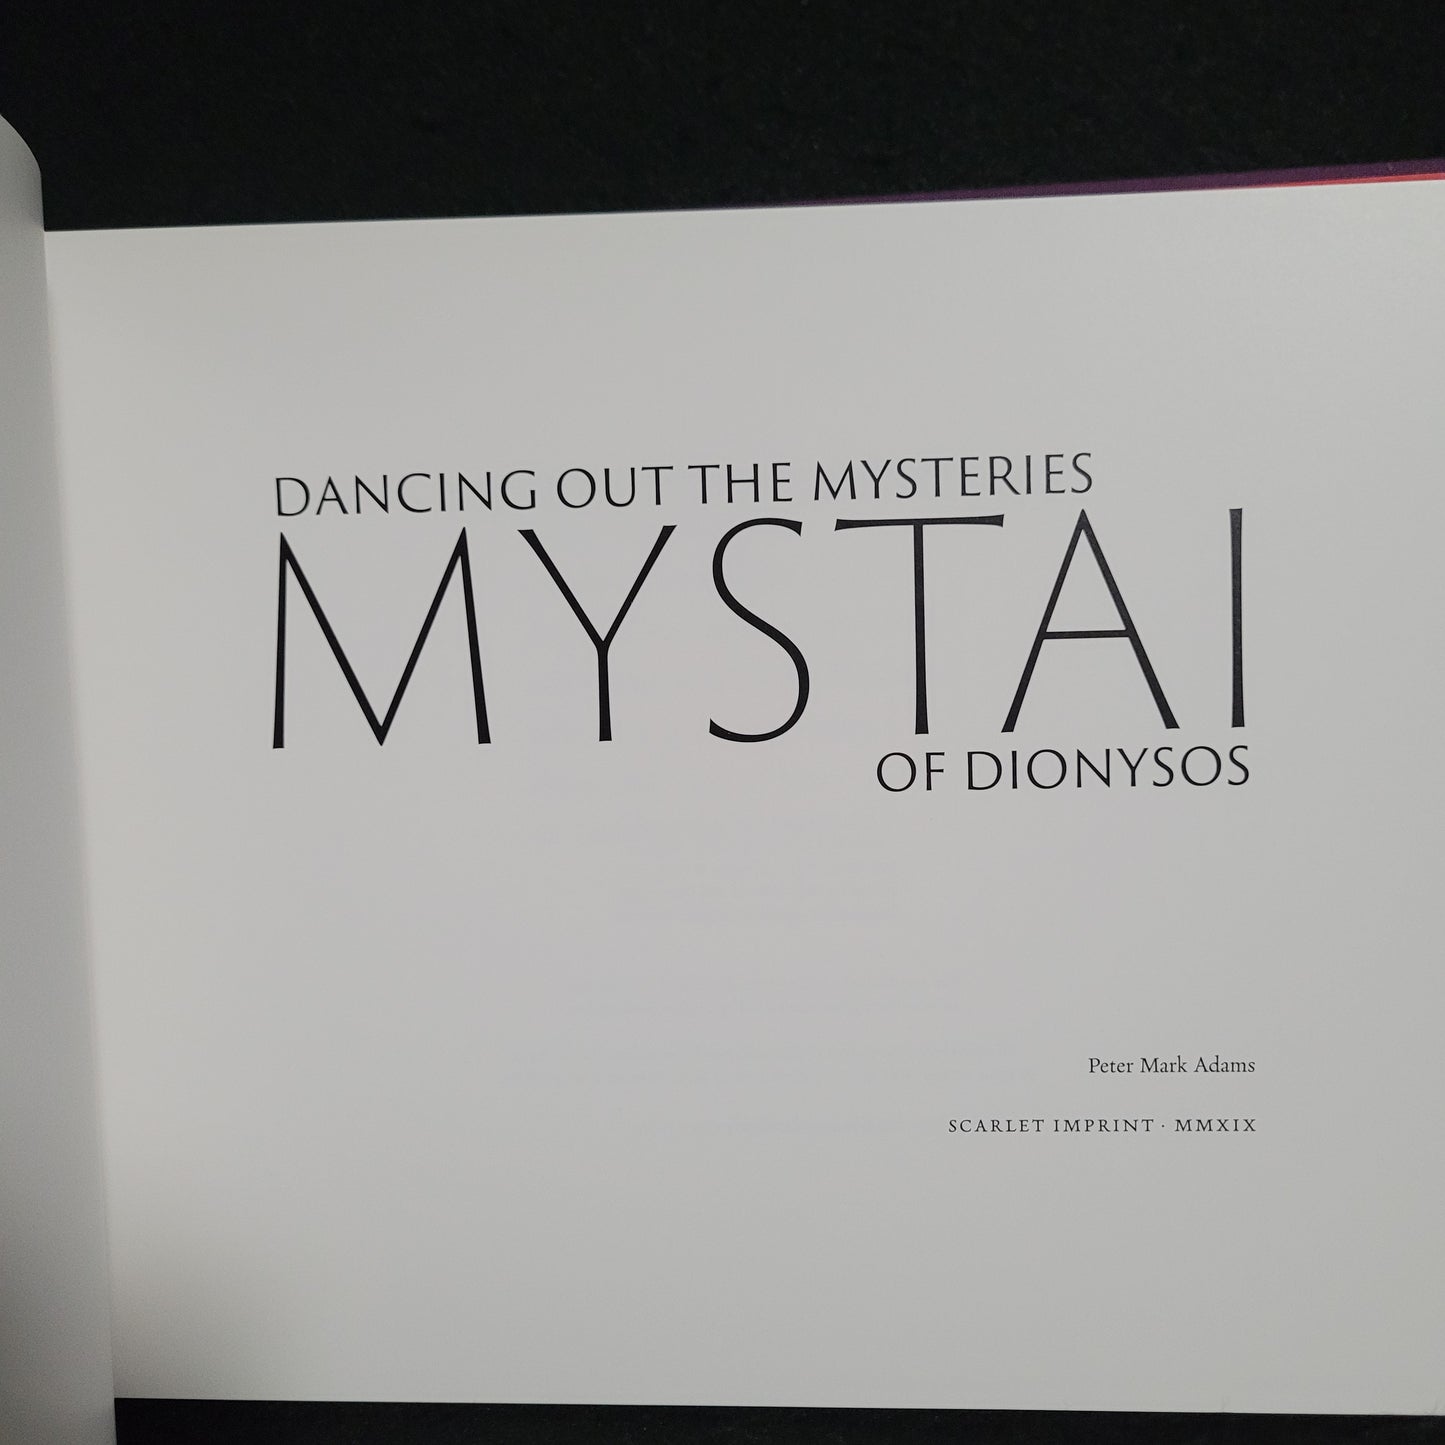 Mystai: Dancing Out the Mysteries of Dionysos by Peter Mark Adams (Scarlet Imprint, 2019) Purple Cloth Hardback Edition